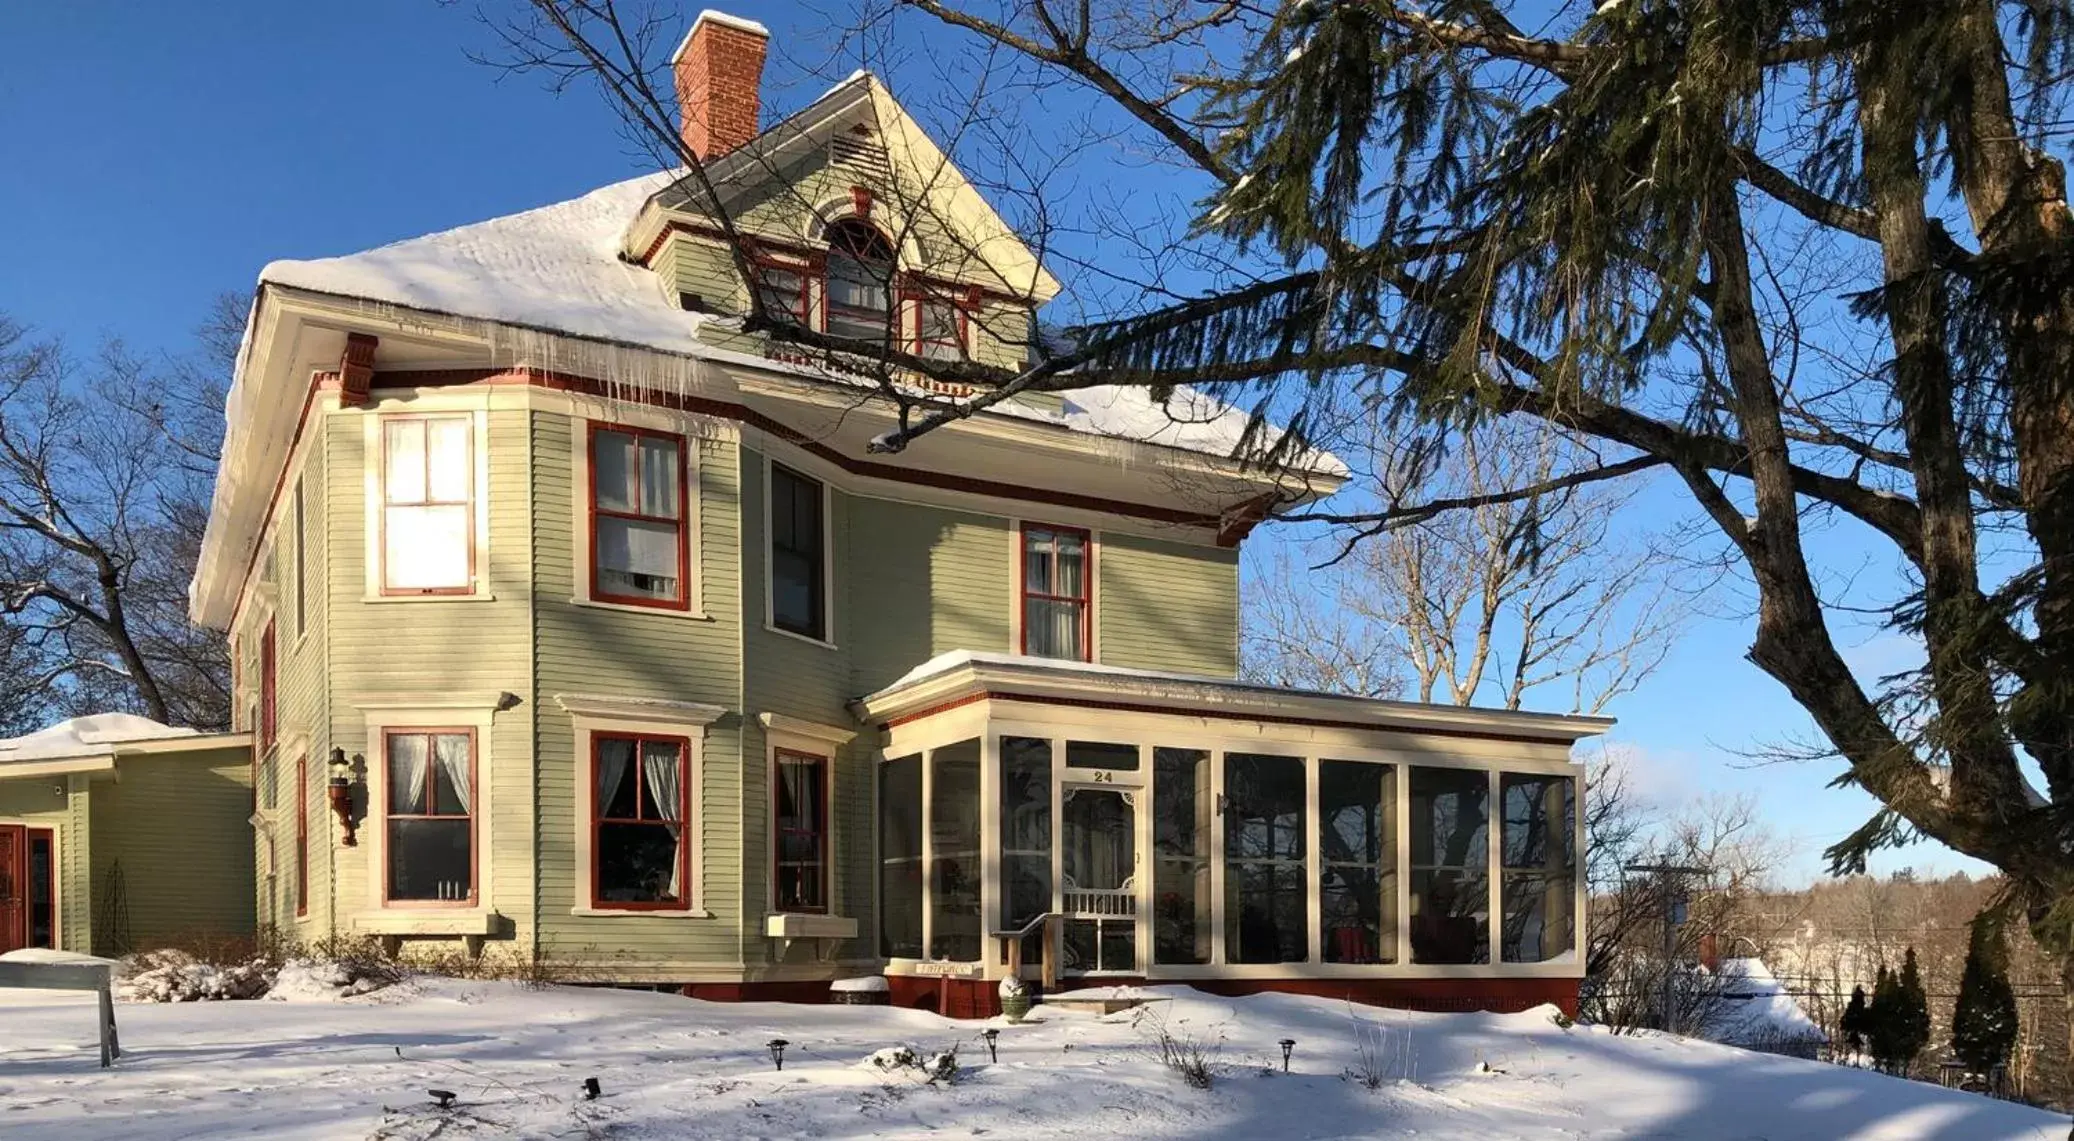 Property building, Winter in Guilford Bed and Breakfast